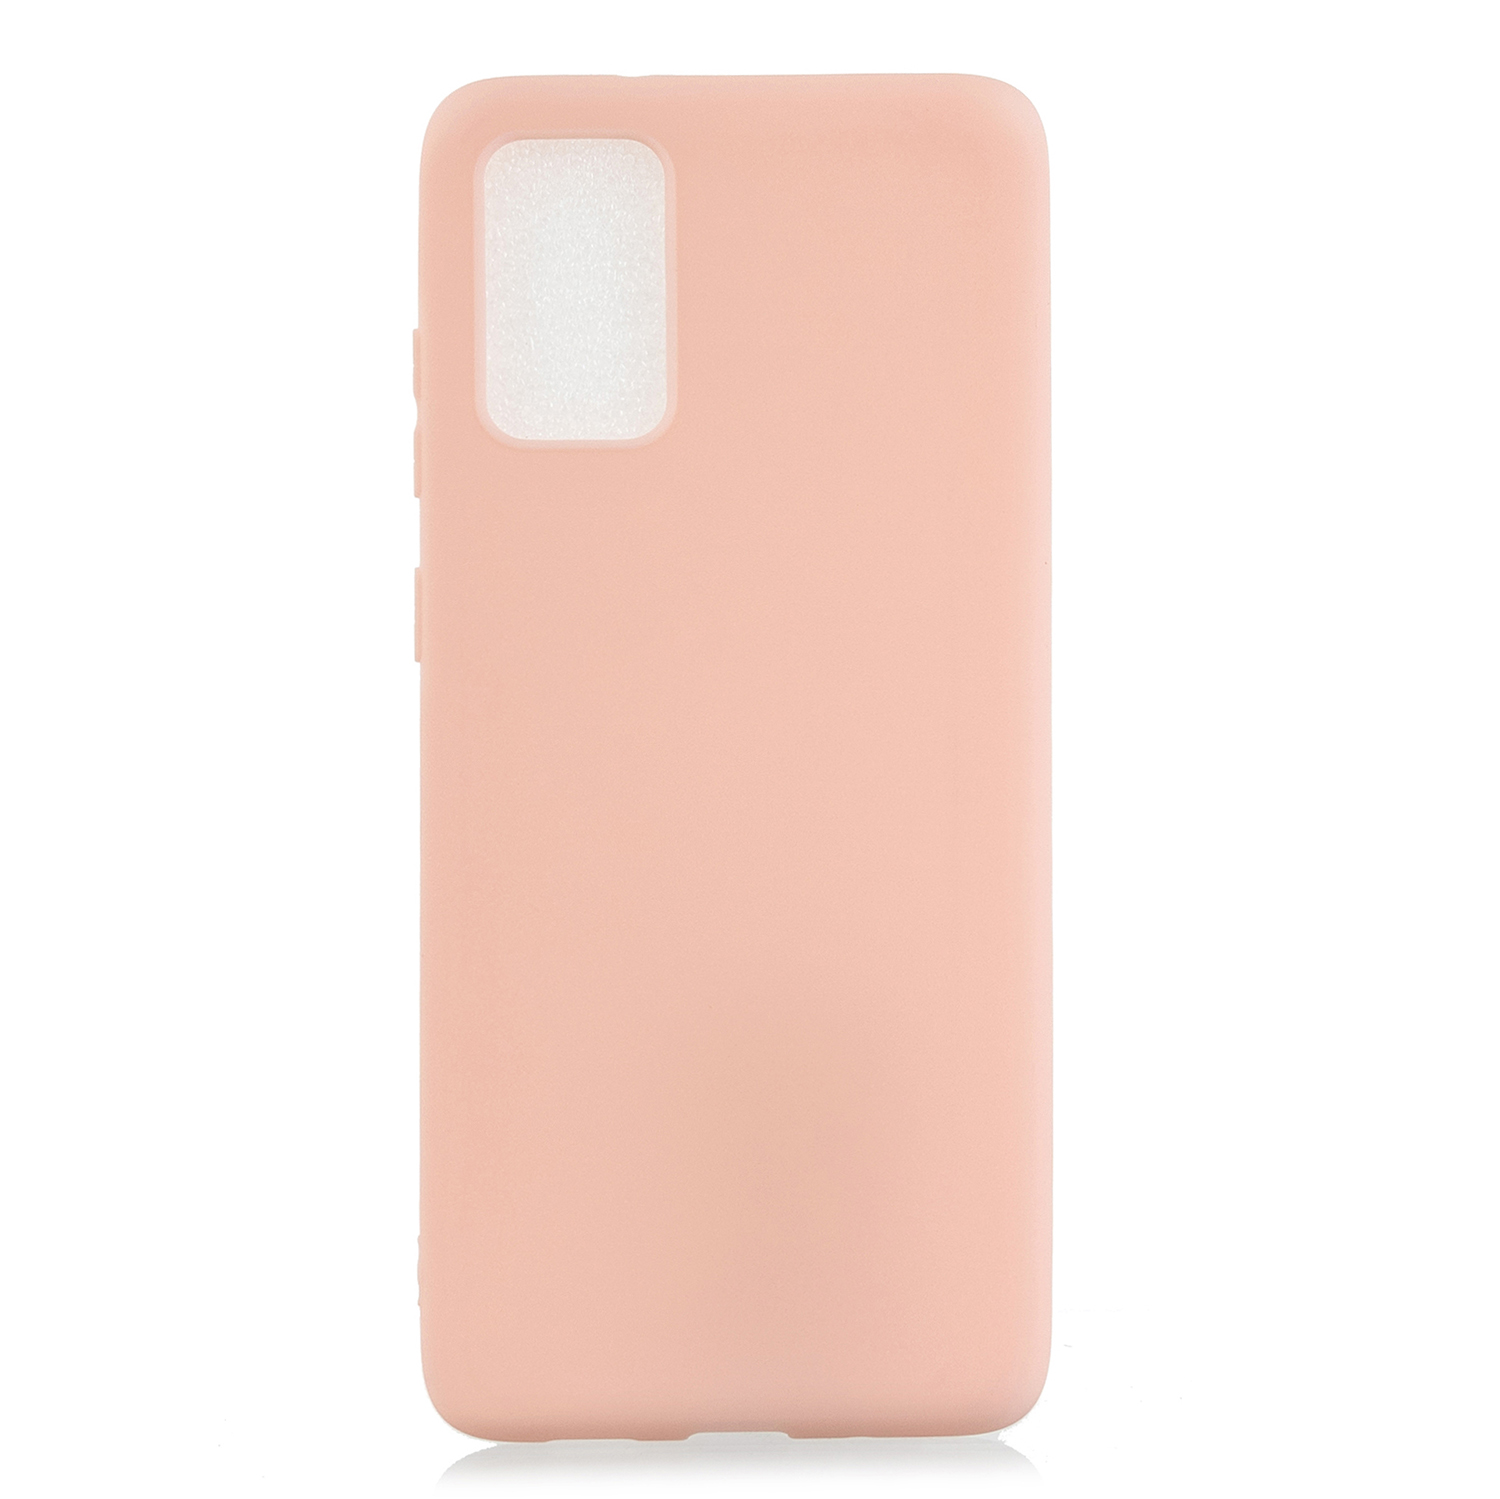 For Samsung A01/ A11/A21/A41/A51/A71/A81/A91 Mobile Phone Case Lovely Candy Color Matte TPU Anti-scratch Non-slip Protective Cover Back Case 6 light pink